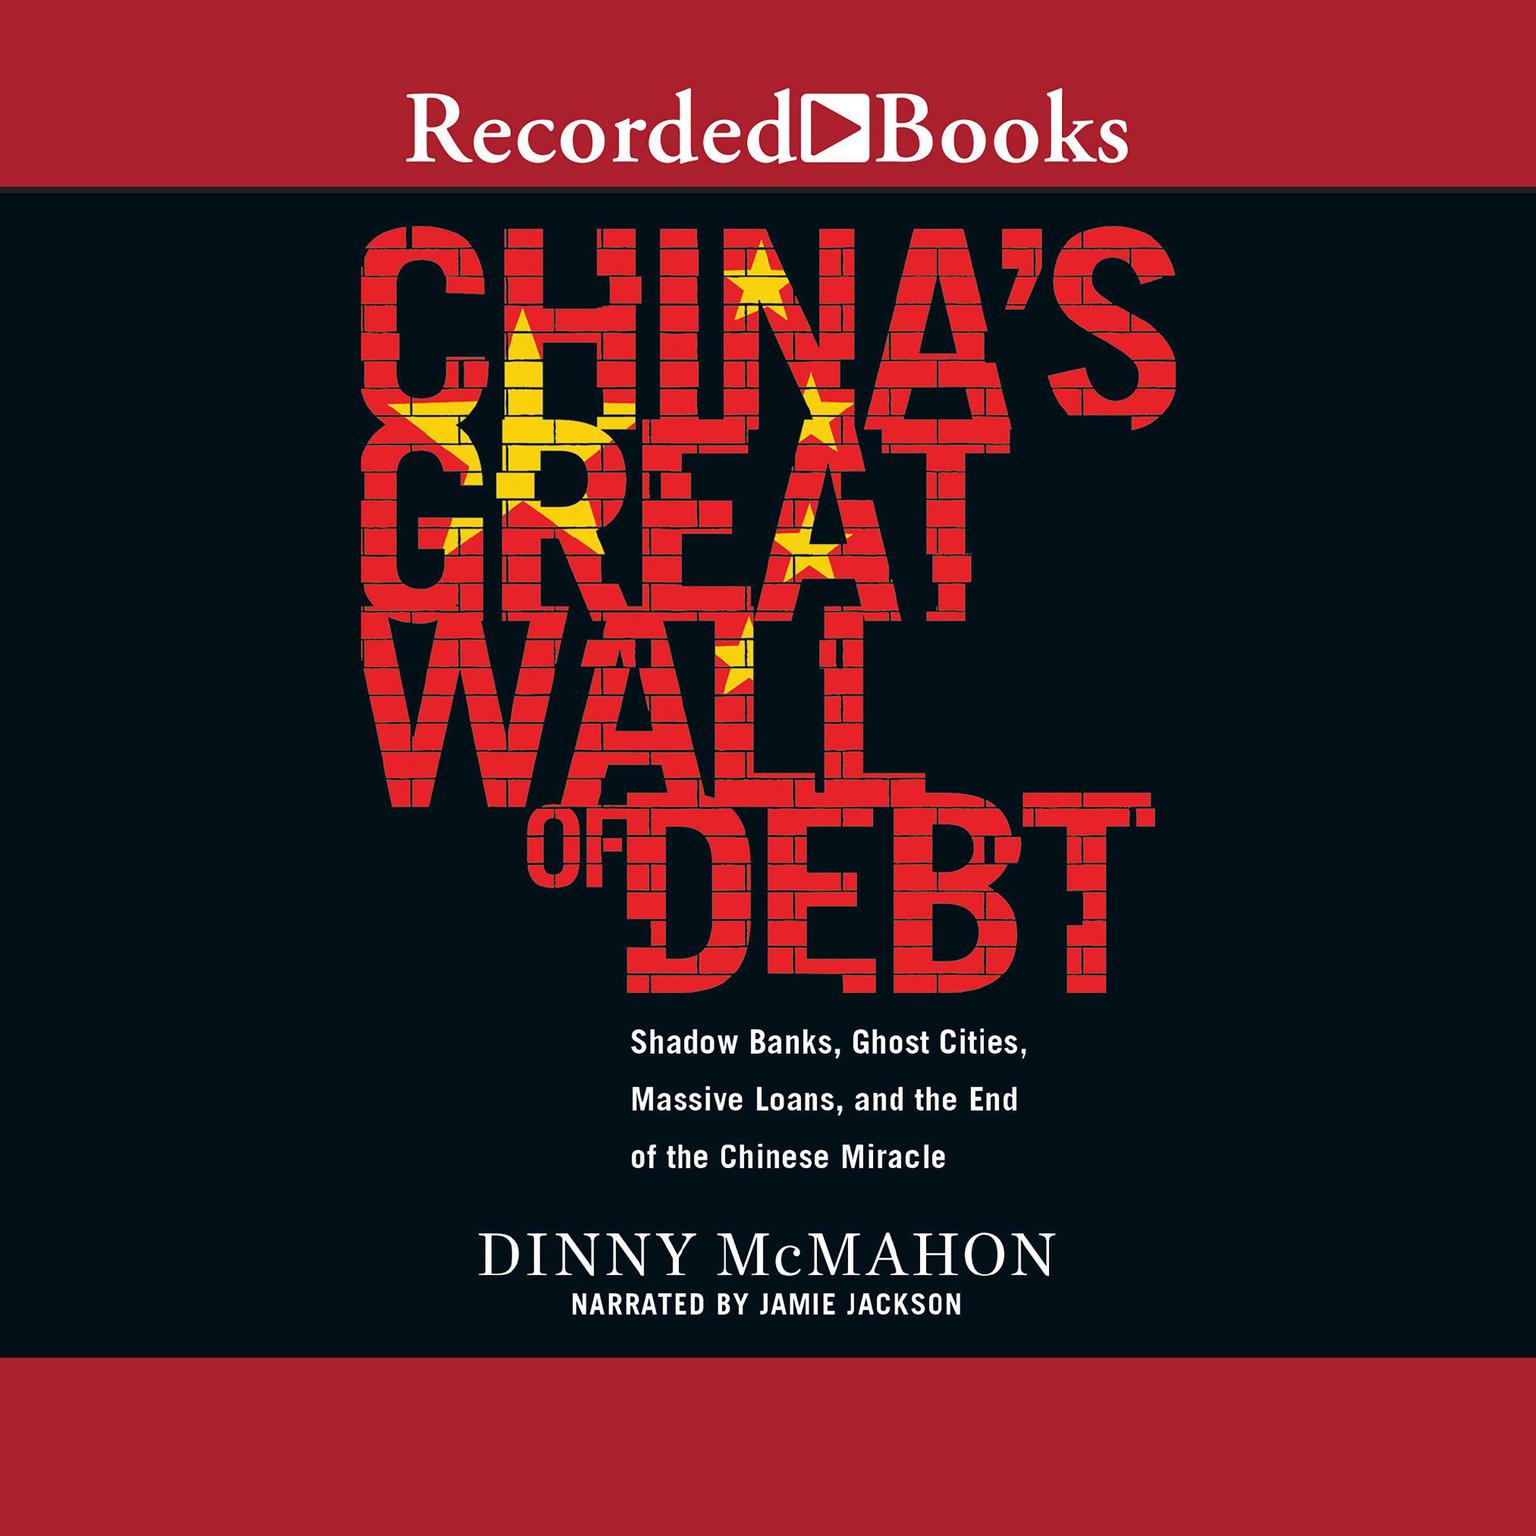 Chinas Great Wall of Debt: Shadow Banks, Ghost Cities, Massive Loans, and the End of the Chinese Miracle Audiobook, by Dinny McMahon